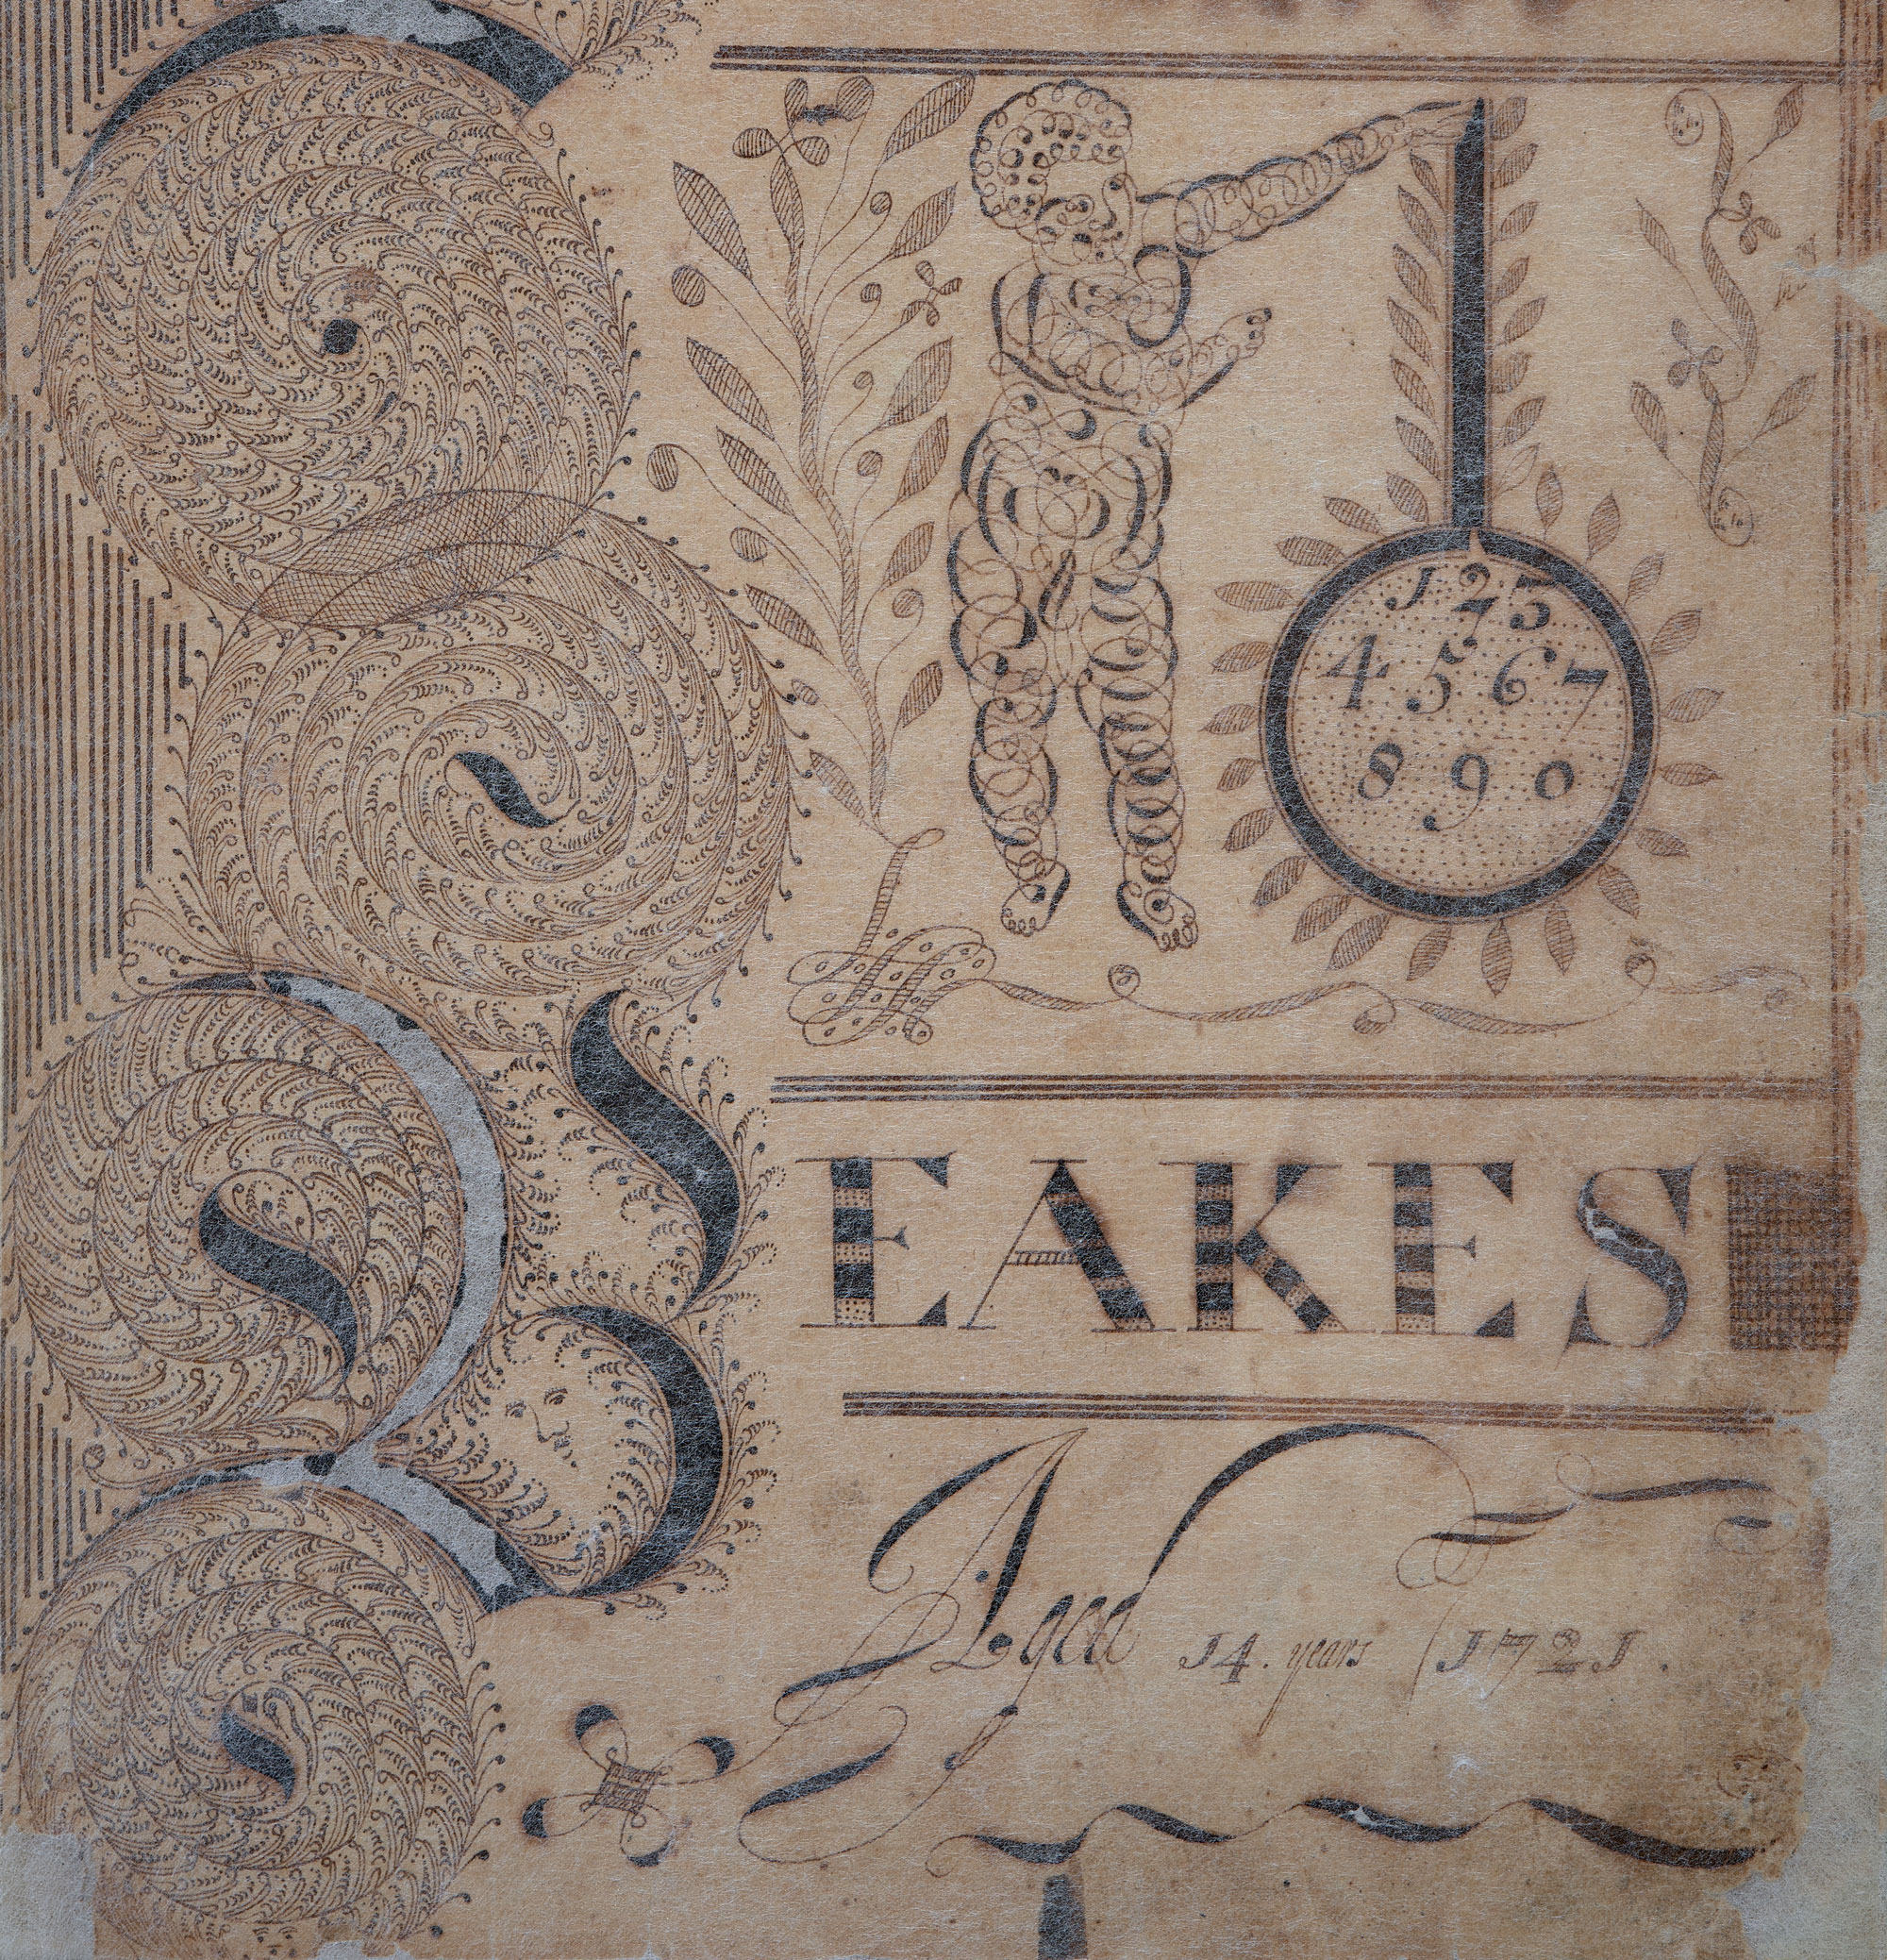 Stacy Beakes, title page from his mathematical notebook, detail, New Jersey, 1721